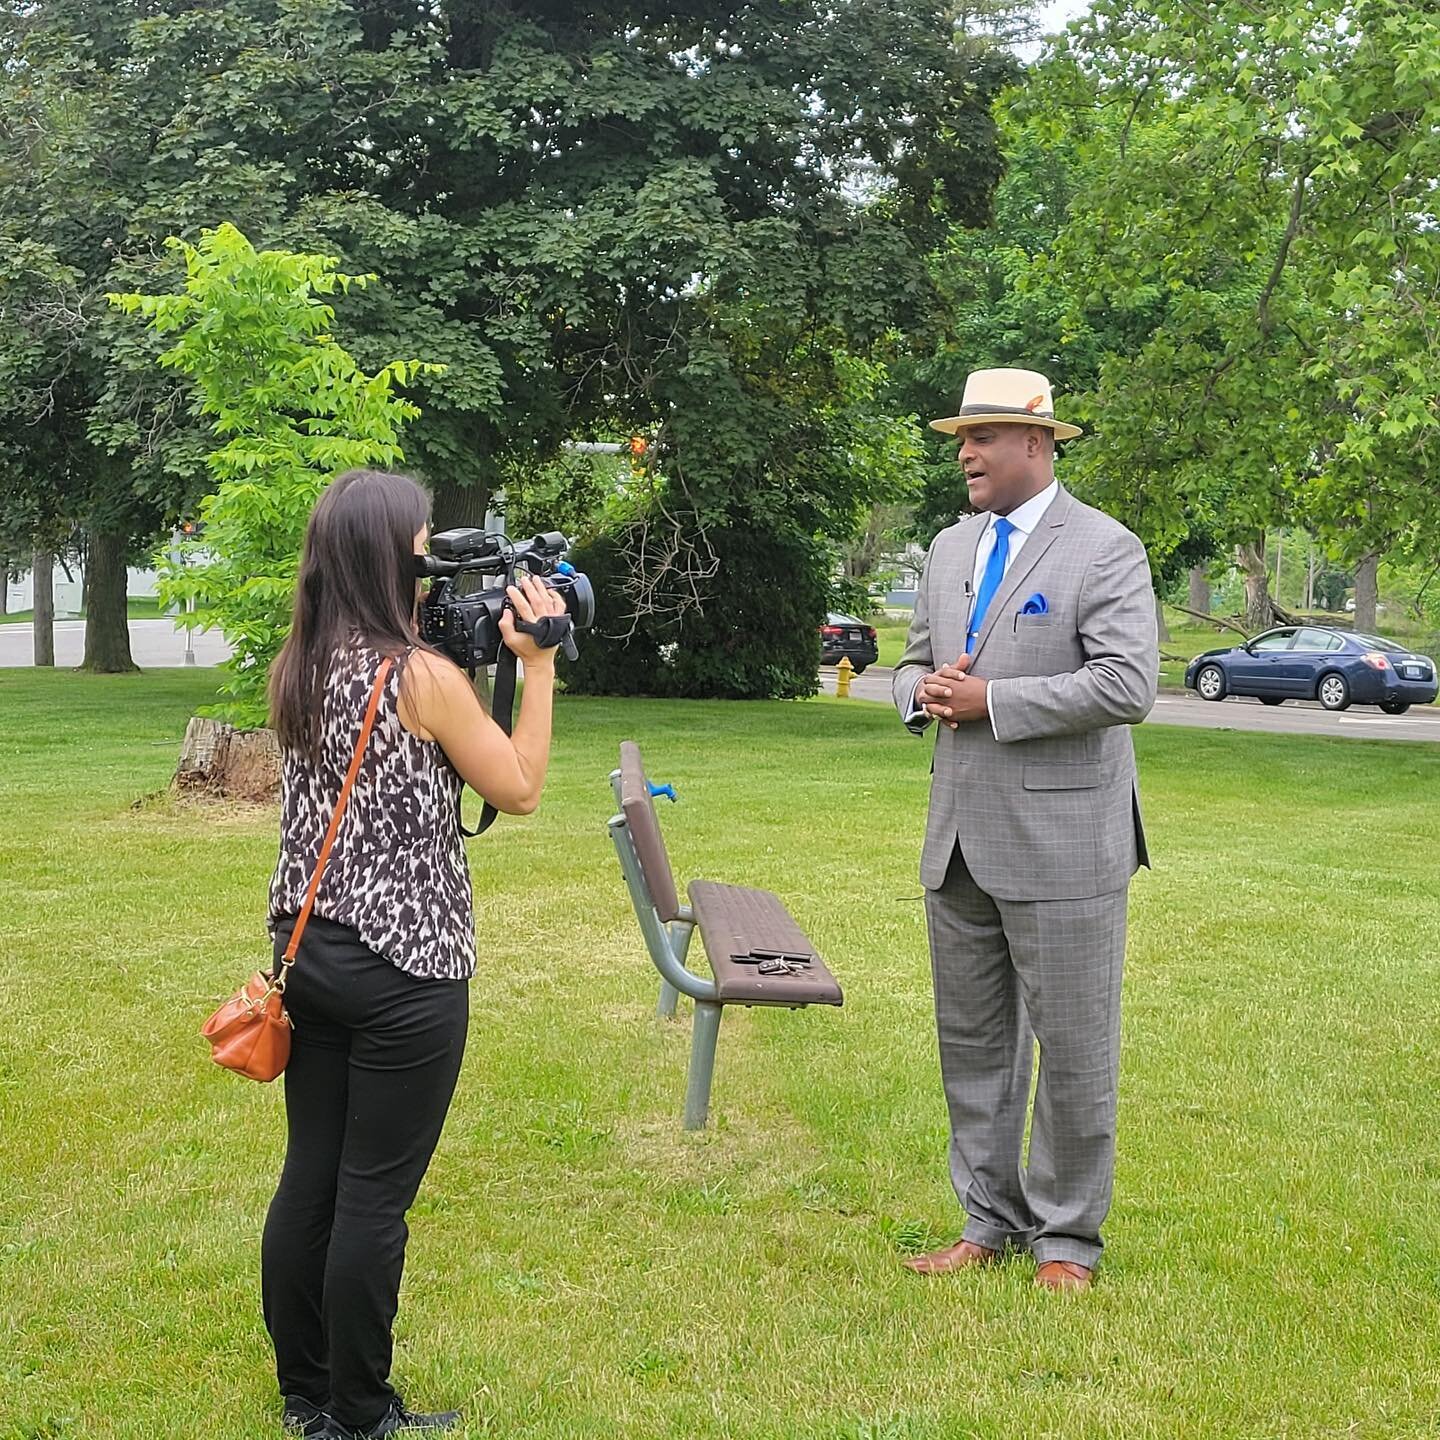 Did you catch us on the news yesterday? Maria Catanzarite from @16newsnow caught up with the team on a visioning tour of the city. She talked to mayor Marcus Muhammad and our partner Deavondre Jones of @dancespire_ about the Best Benton Harbor projec